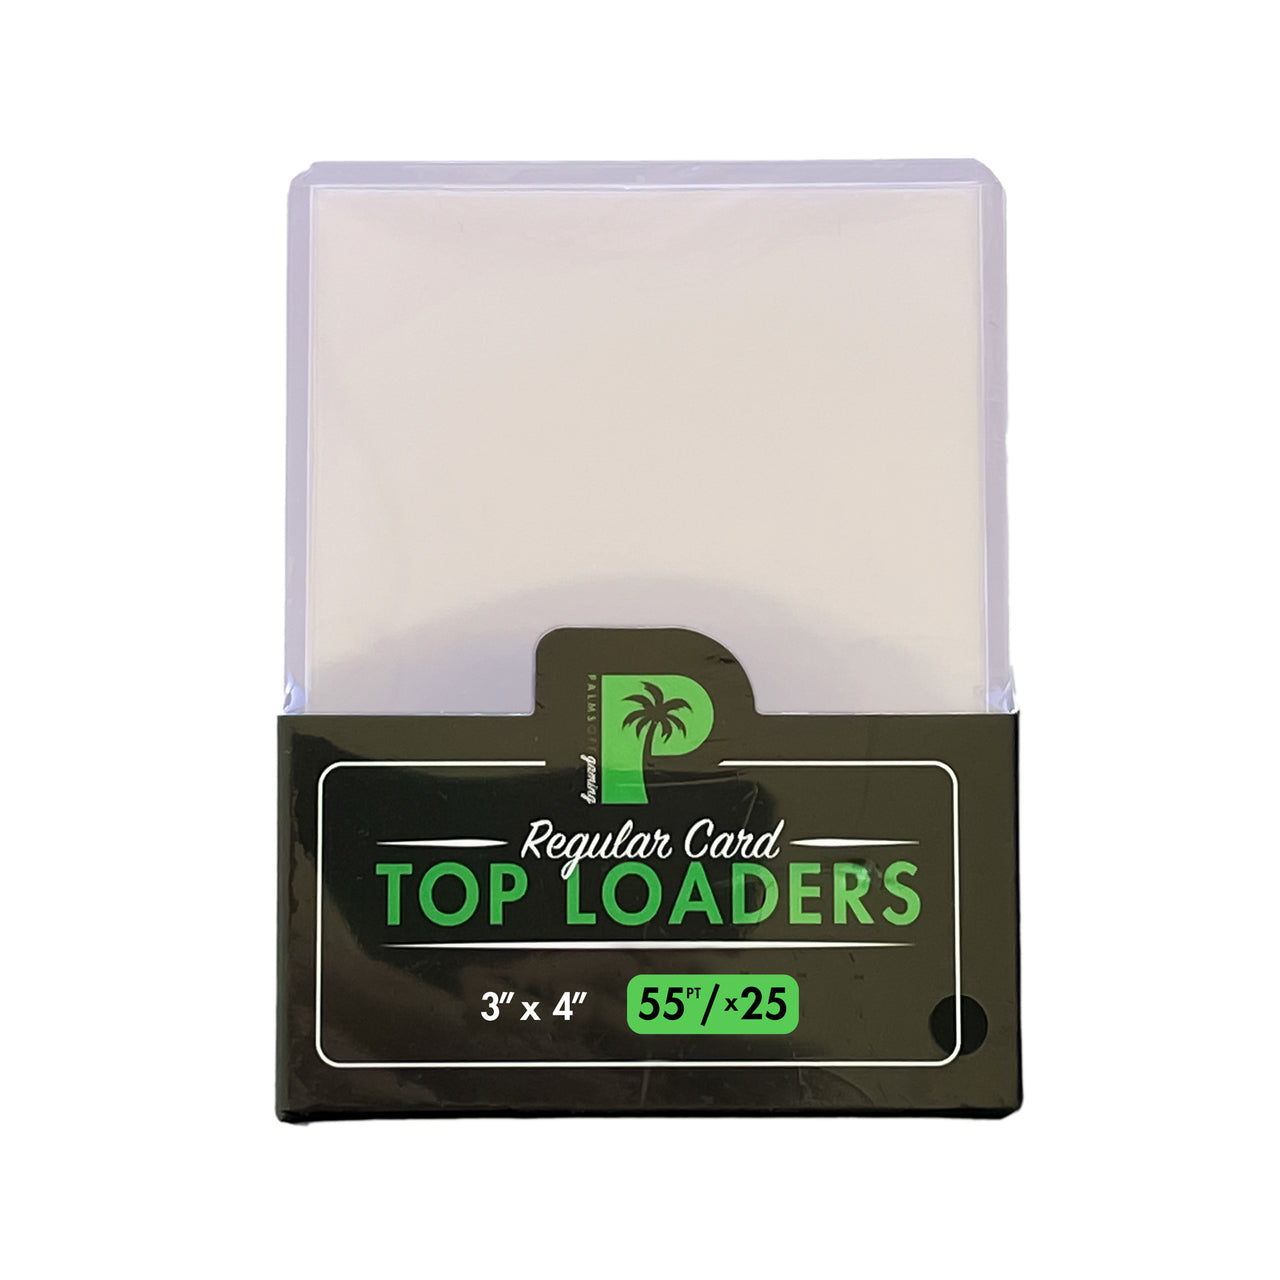 Palms Off Gaming - 55pt Top Loaders (25pc)